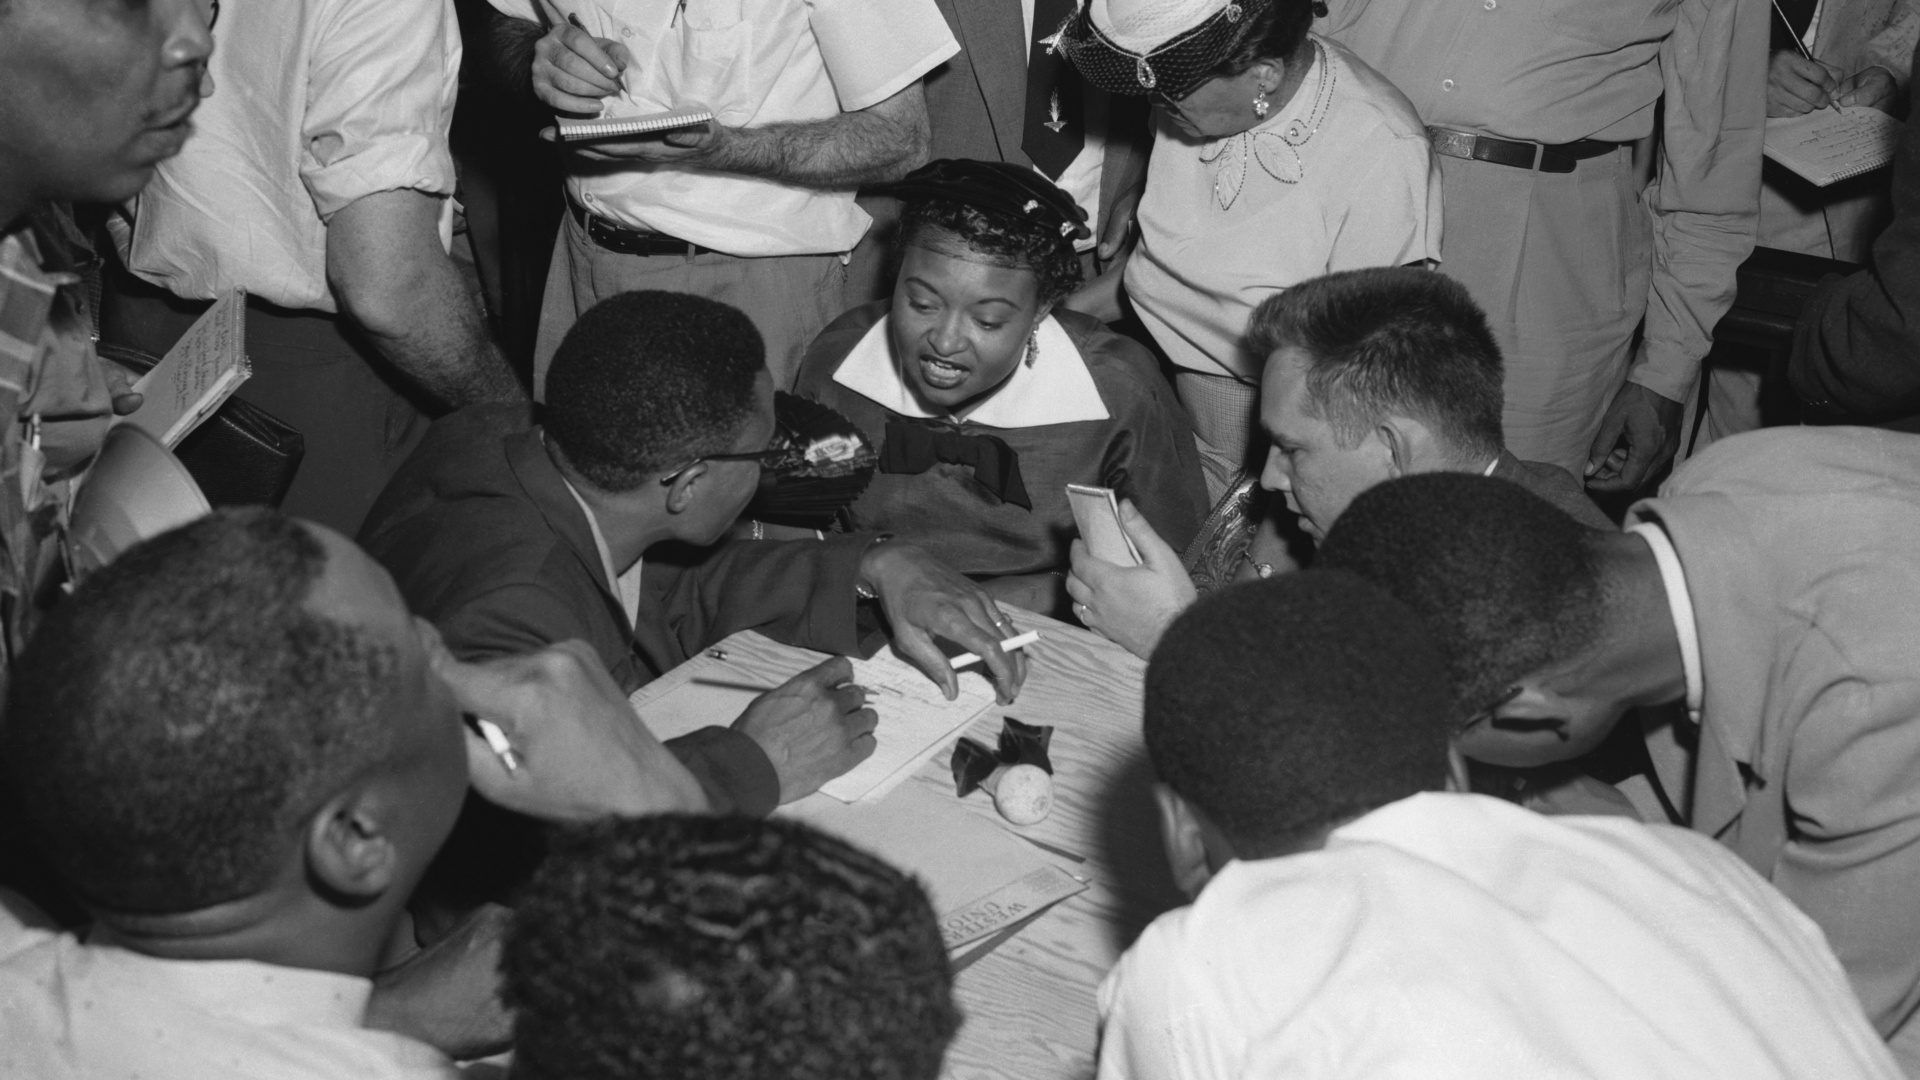 Mamie Till Mobley is surrounded by journalists as she talks to the press at the Tallahatchie County Courthouse in 1955.